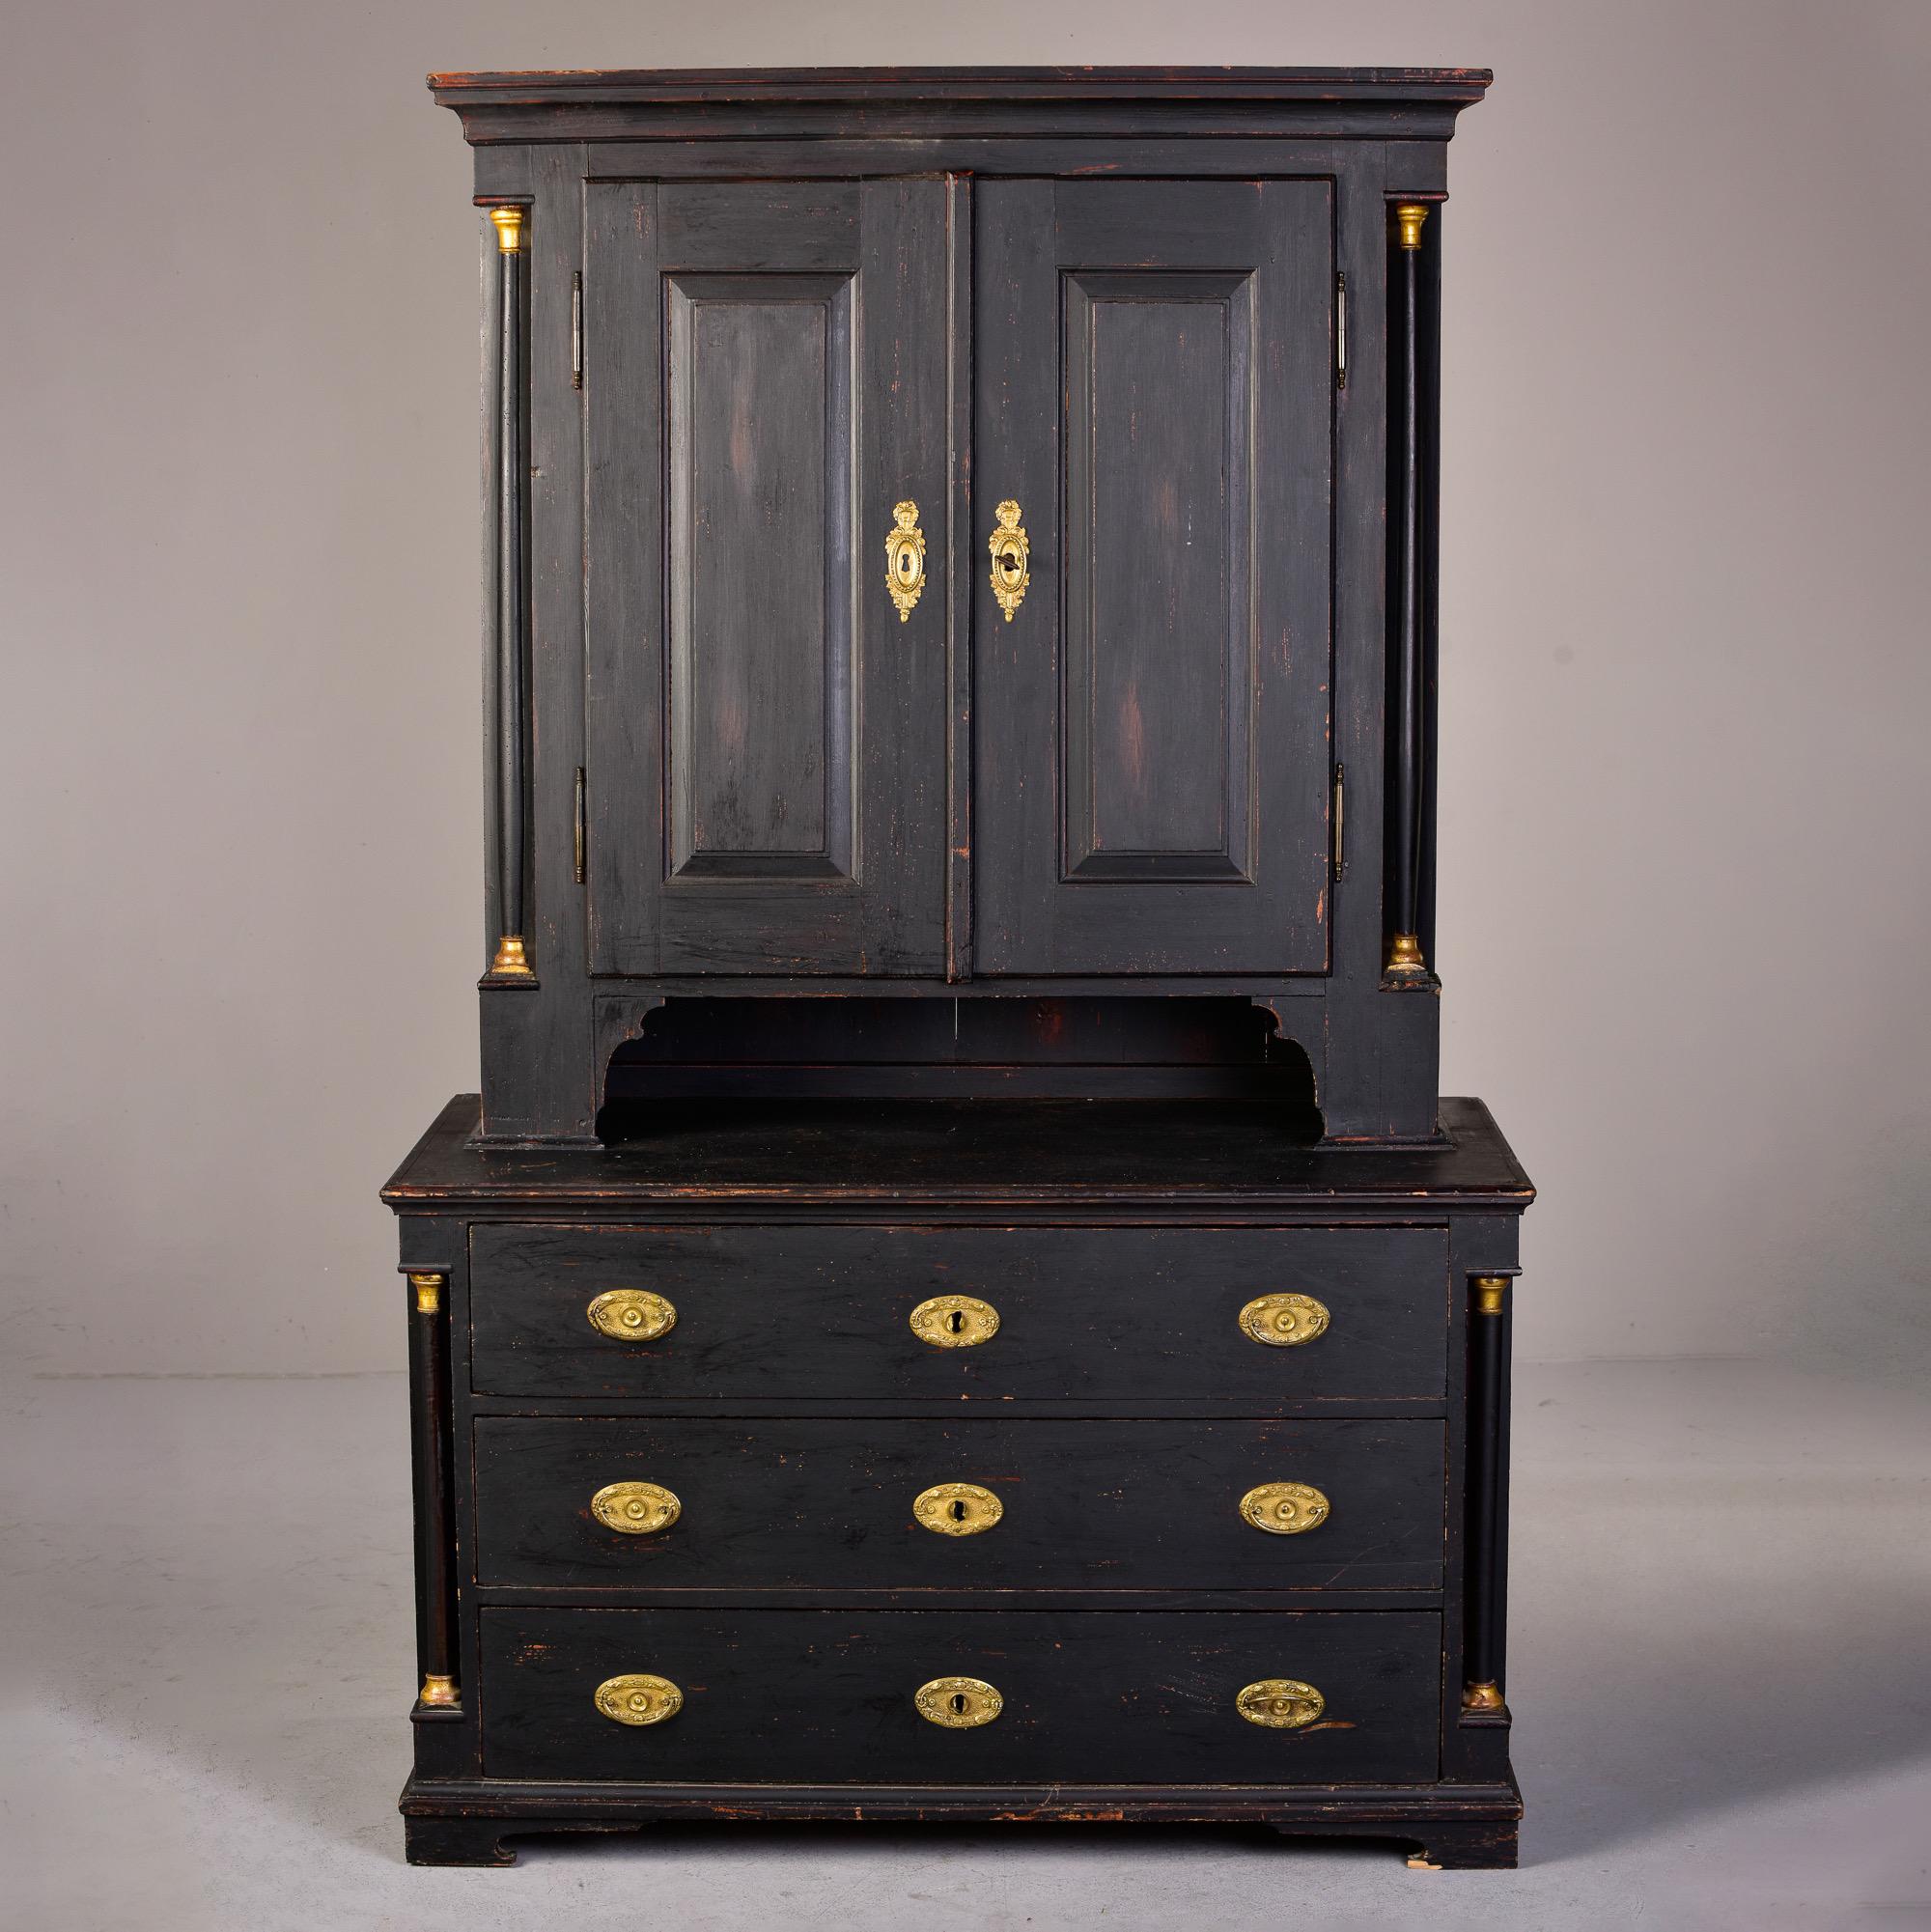 Circa 1810 Austrian linen cupboard has a black painted finish and brass hardware. Top section has two internal shelves and two small functional drawers with painted red interior. Lower section has three drawers, brass pulls. Top and base separate